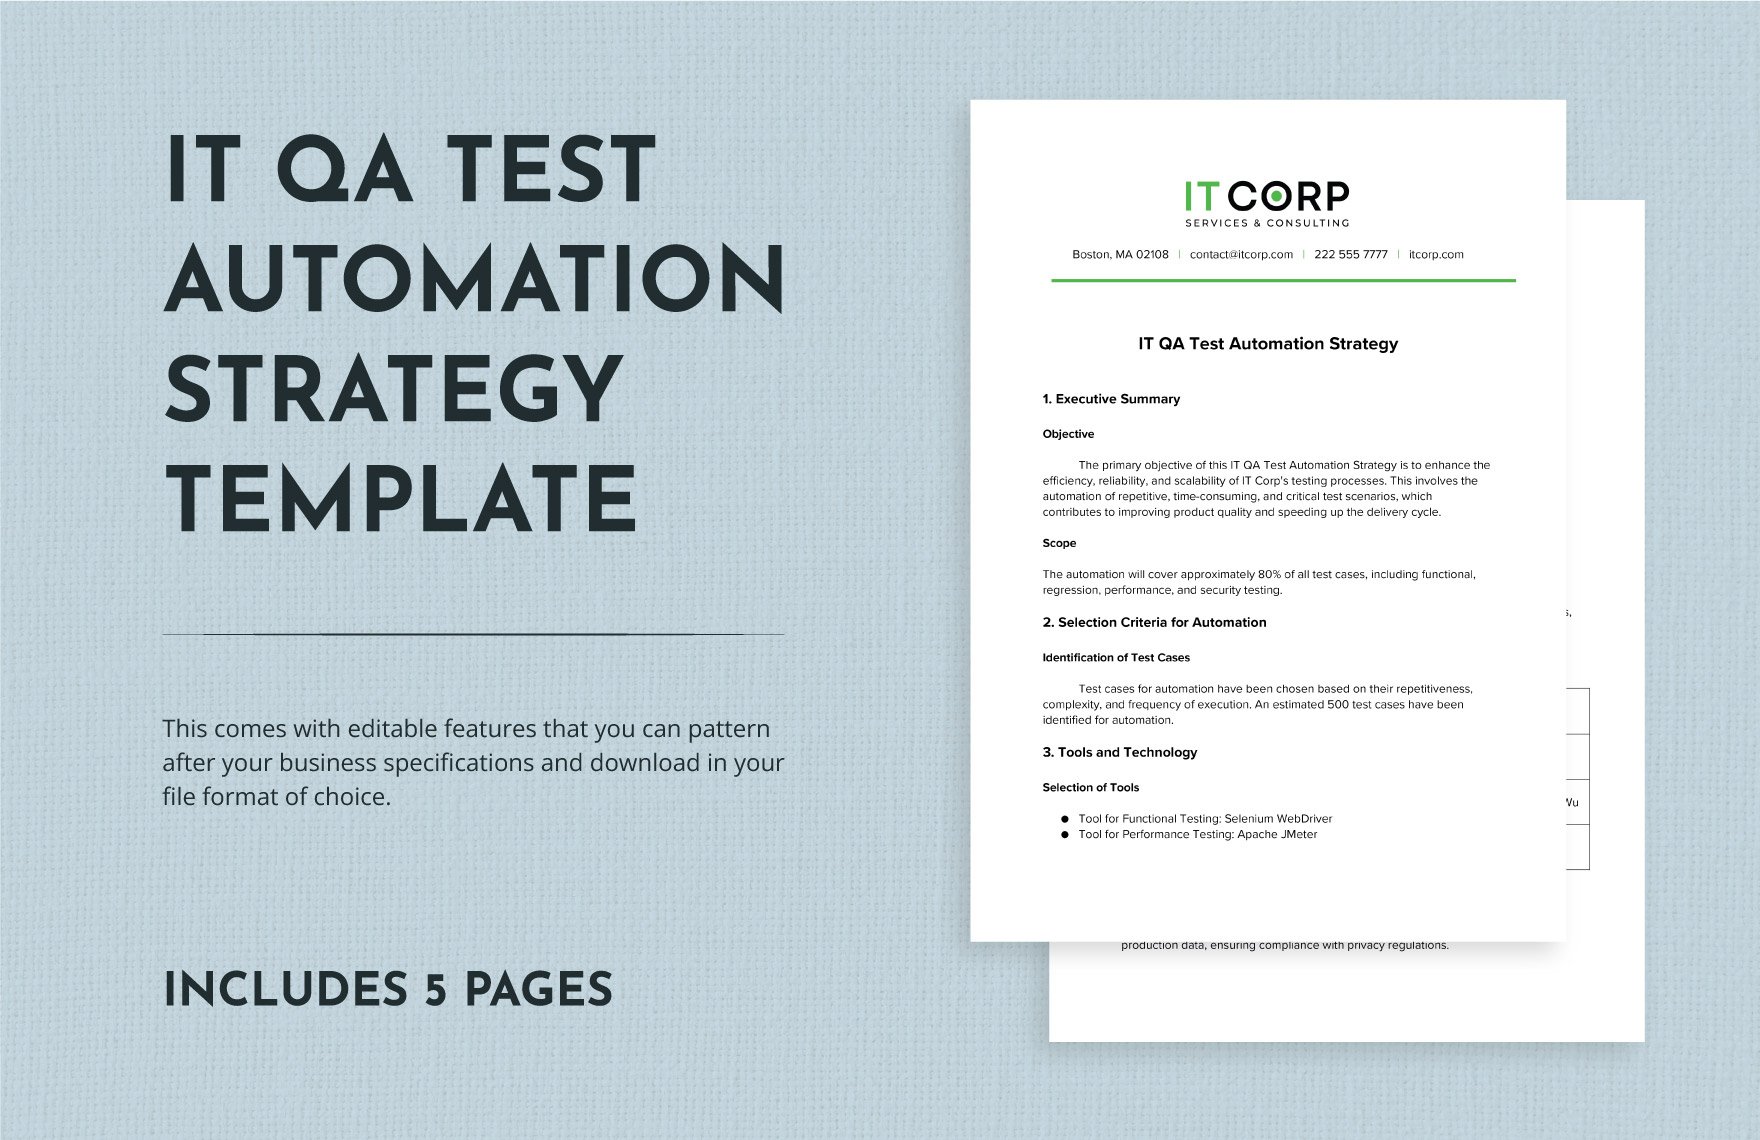 IT QA Test Automation Strategy Template in Word, Google Docs, PDF